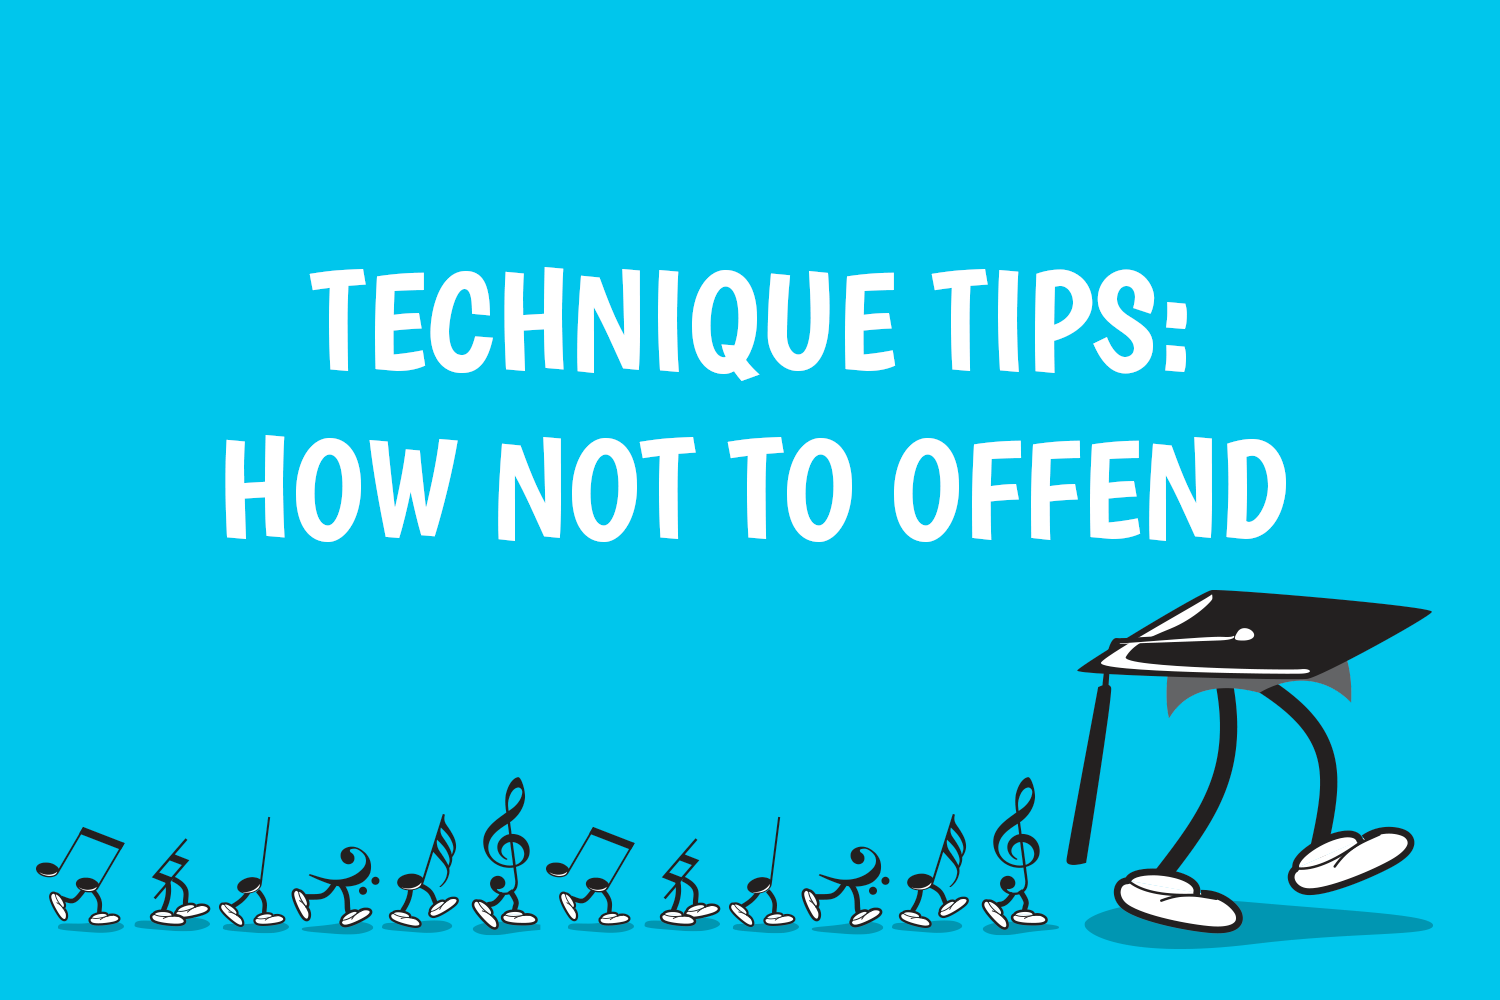 Technique Tips: How Not to Offend